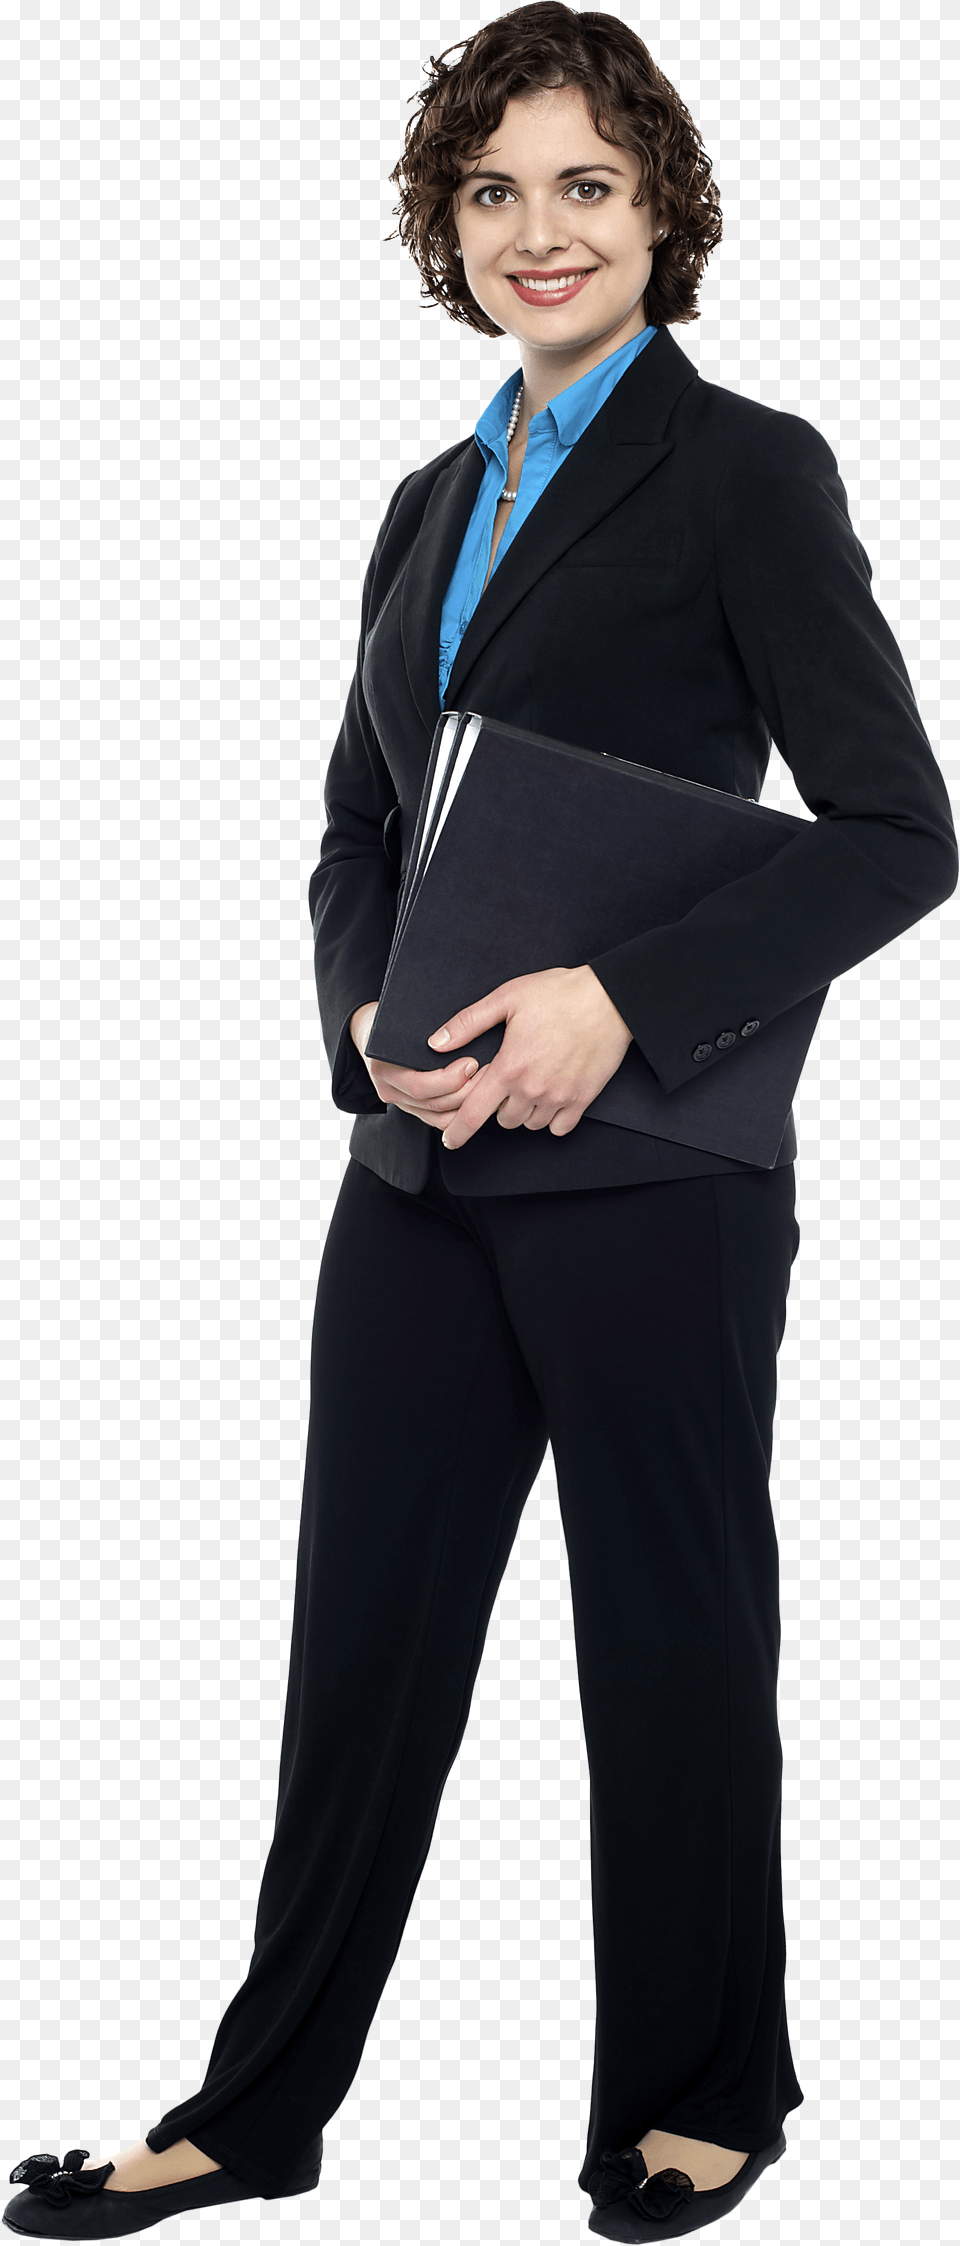 Business Women Image Business Woman Background Png